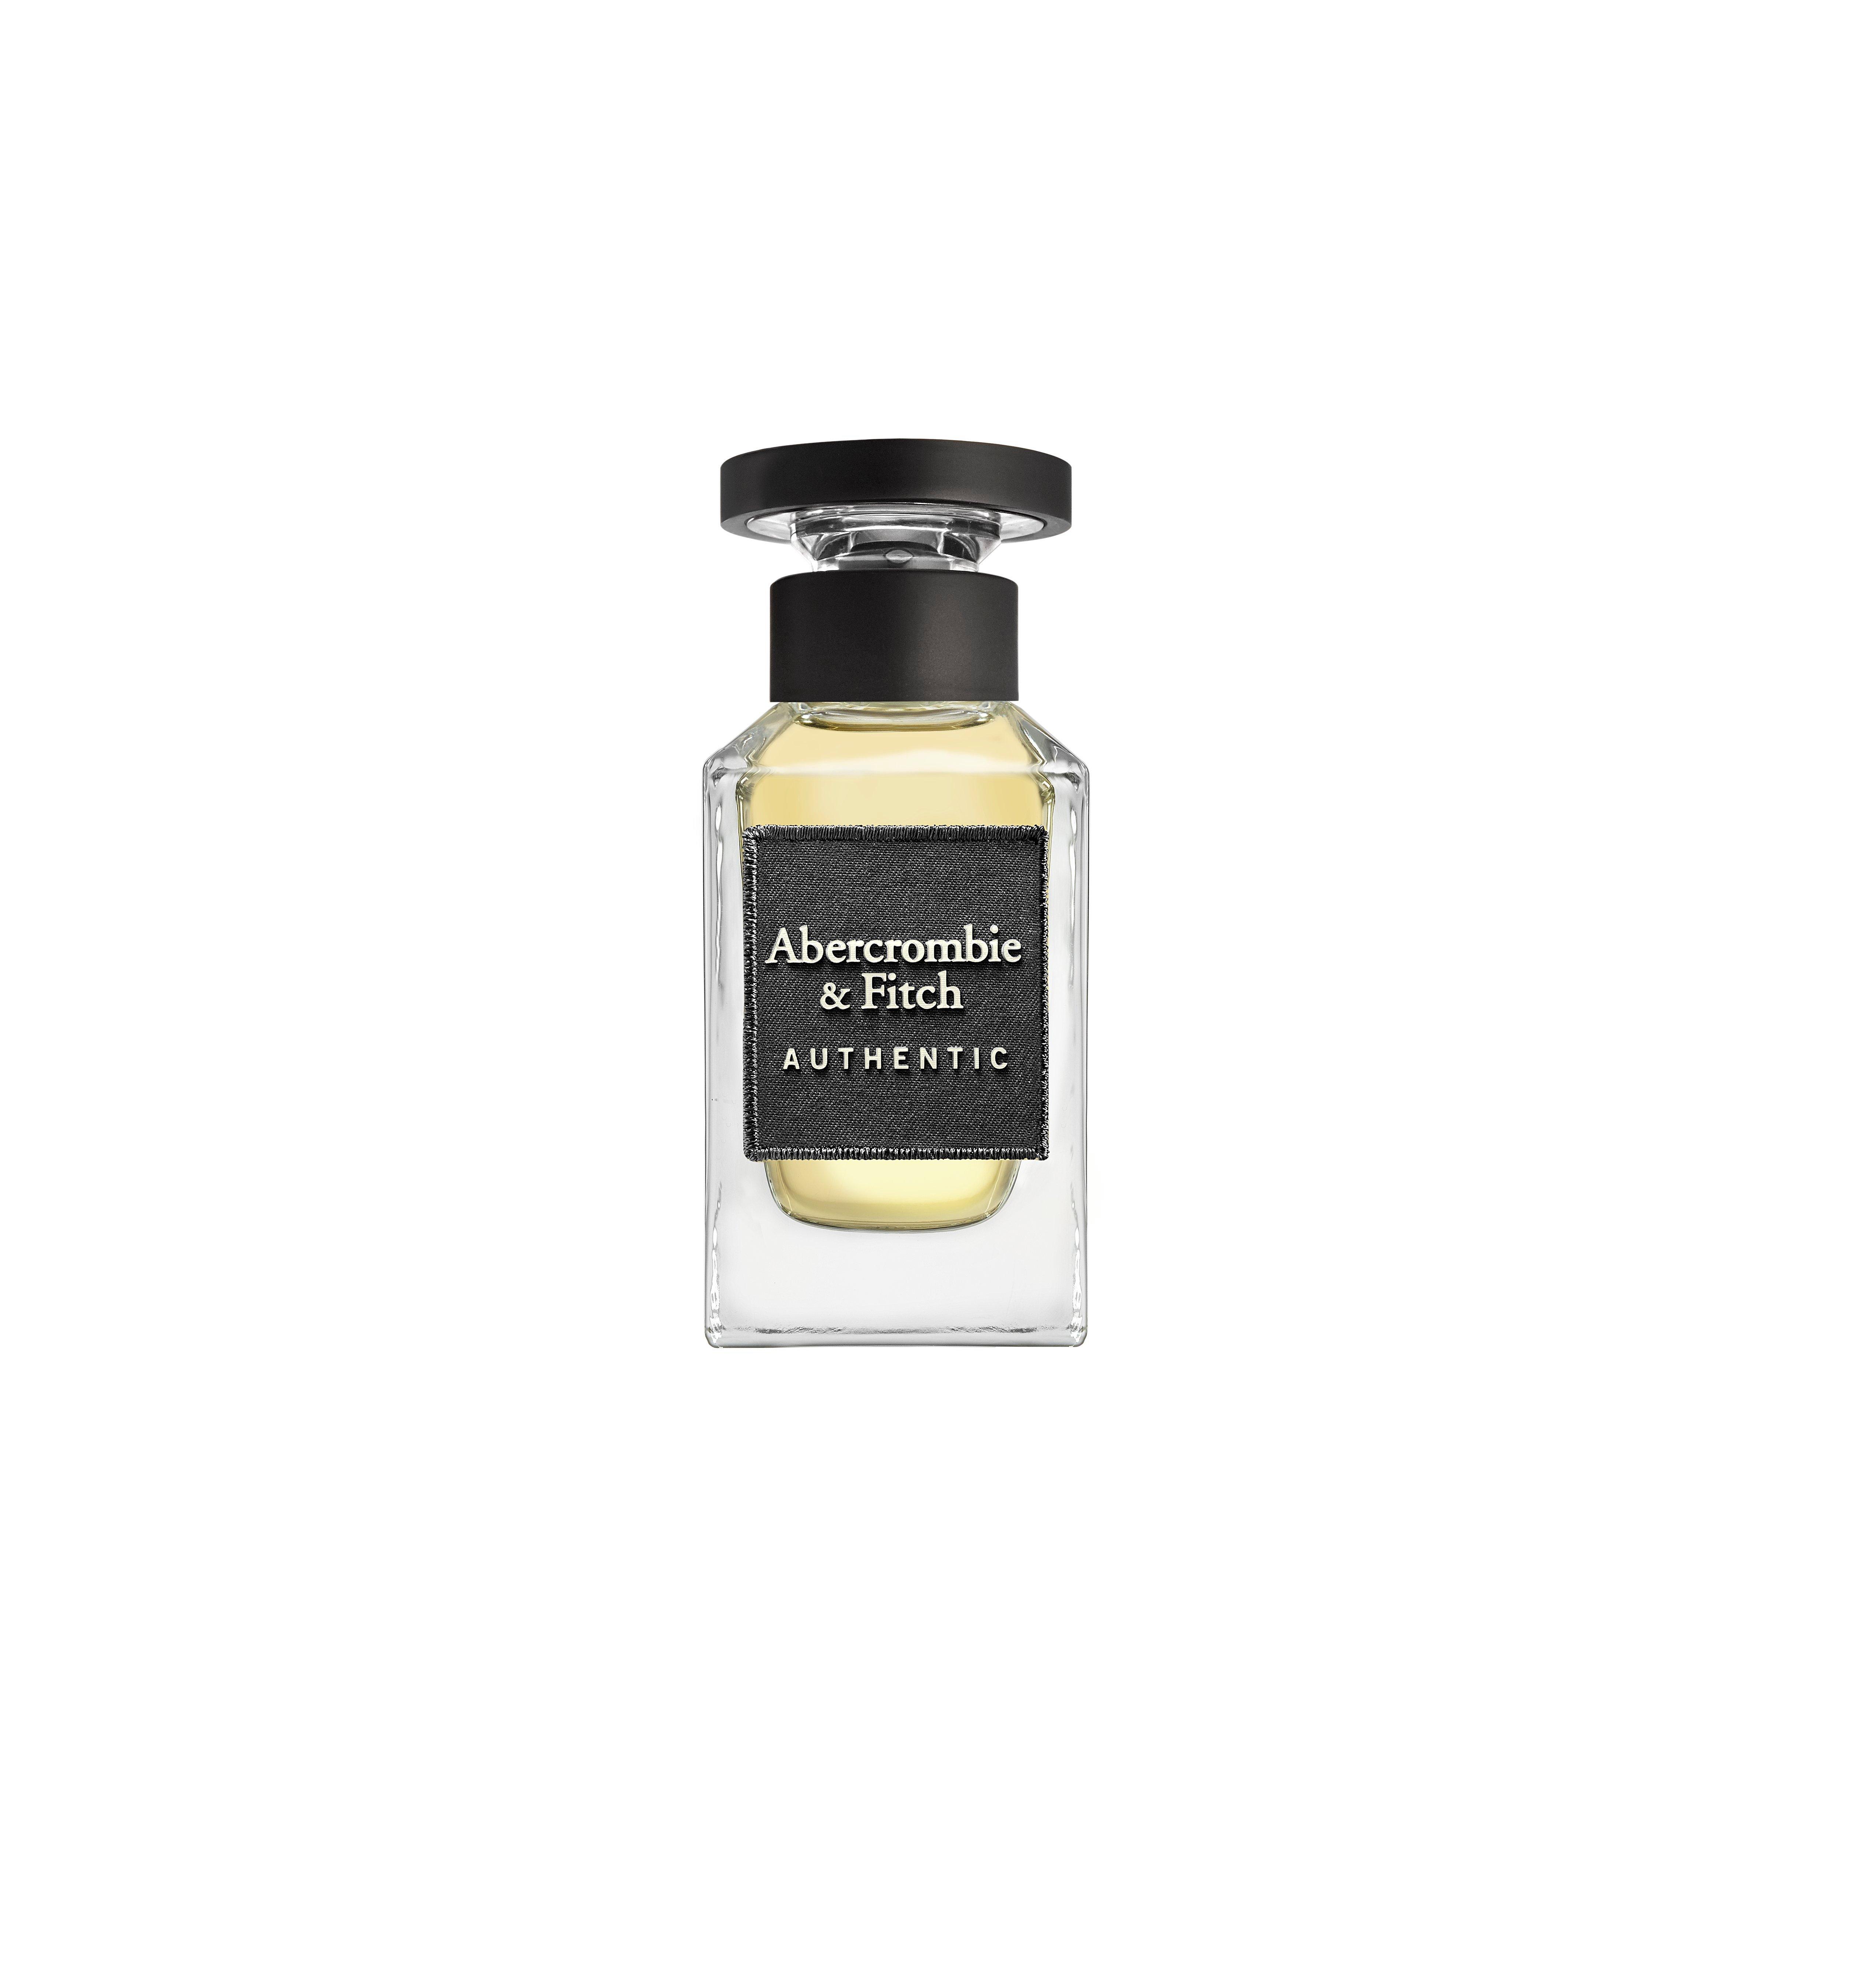 Image of Abercrombie & Fitch Authentic Man, EDT - 50ml